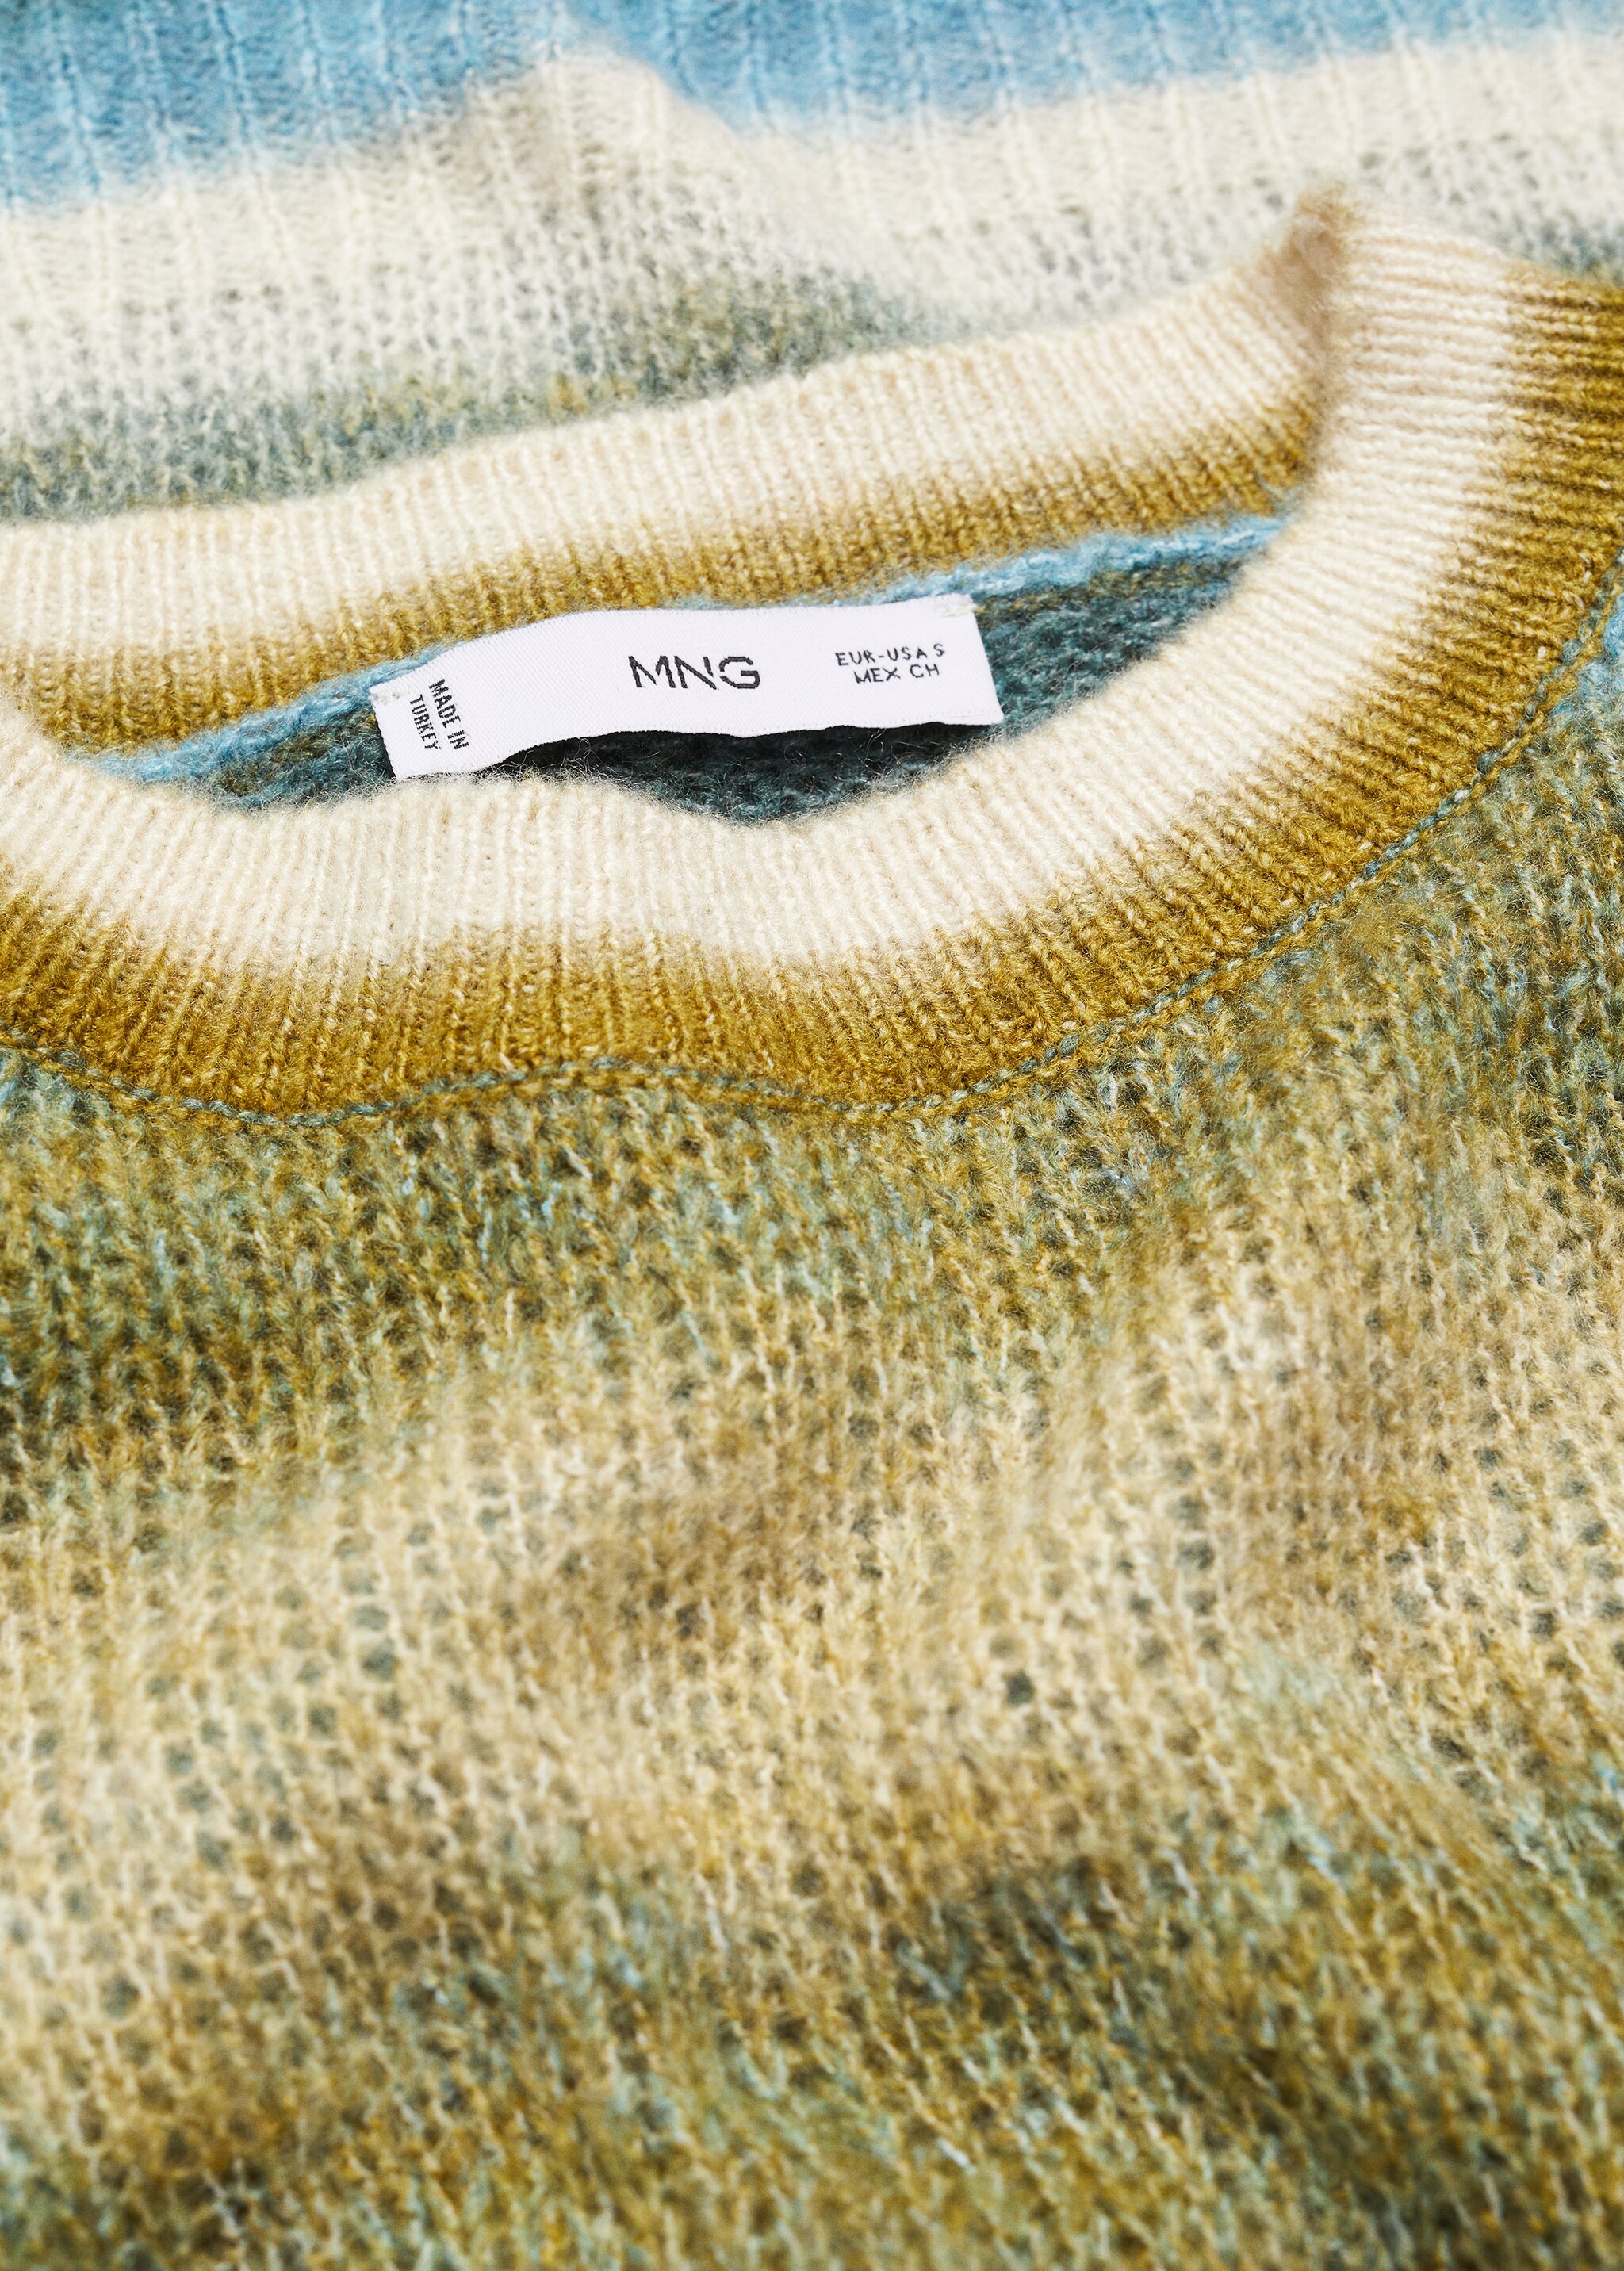 Degraded knitted sweater - Details of the article 8